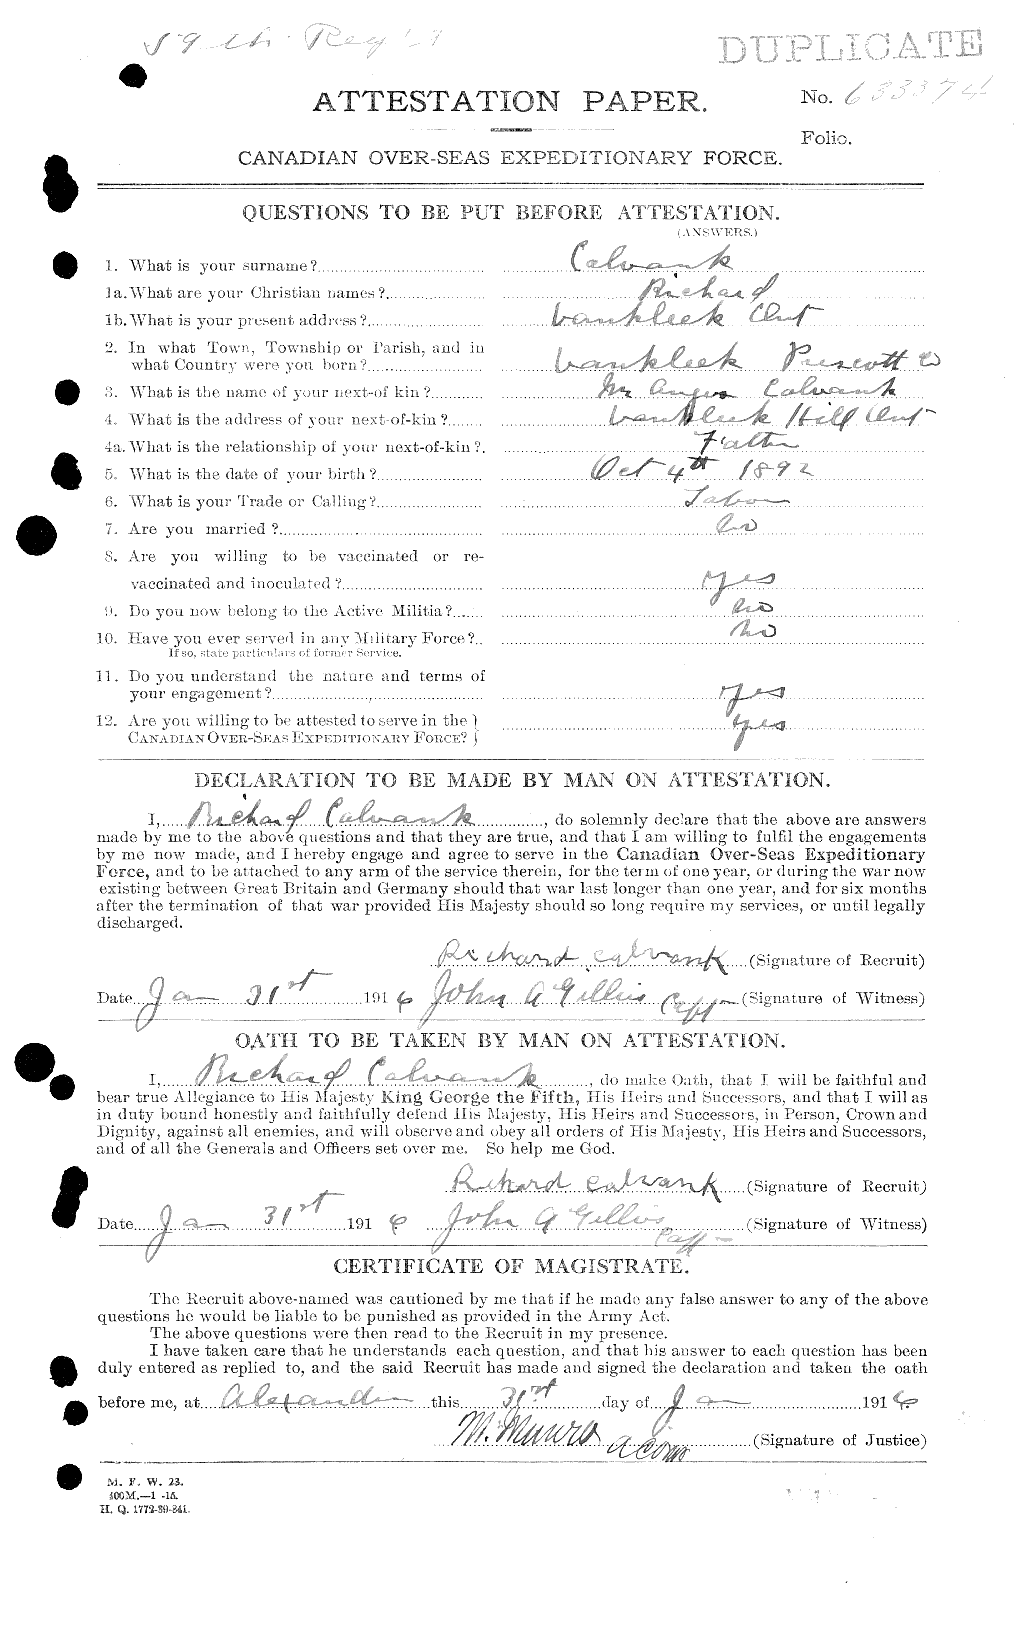 Personnel Records of the First World War - CEF 001368a